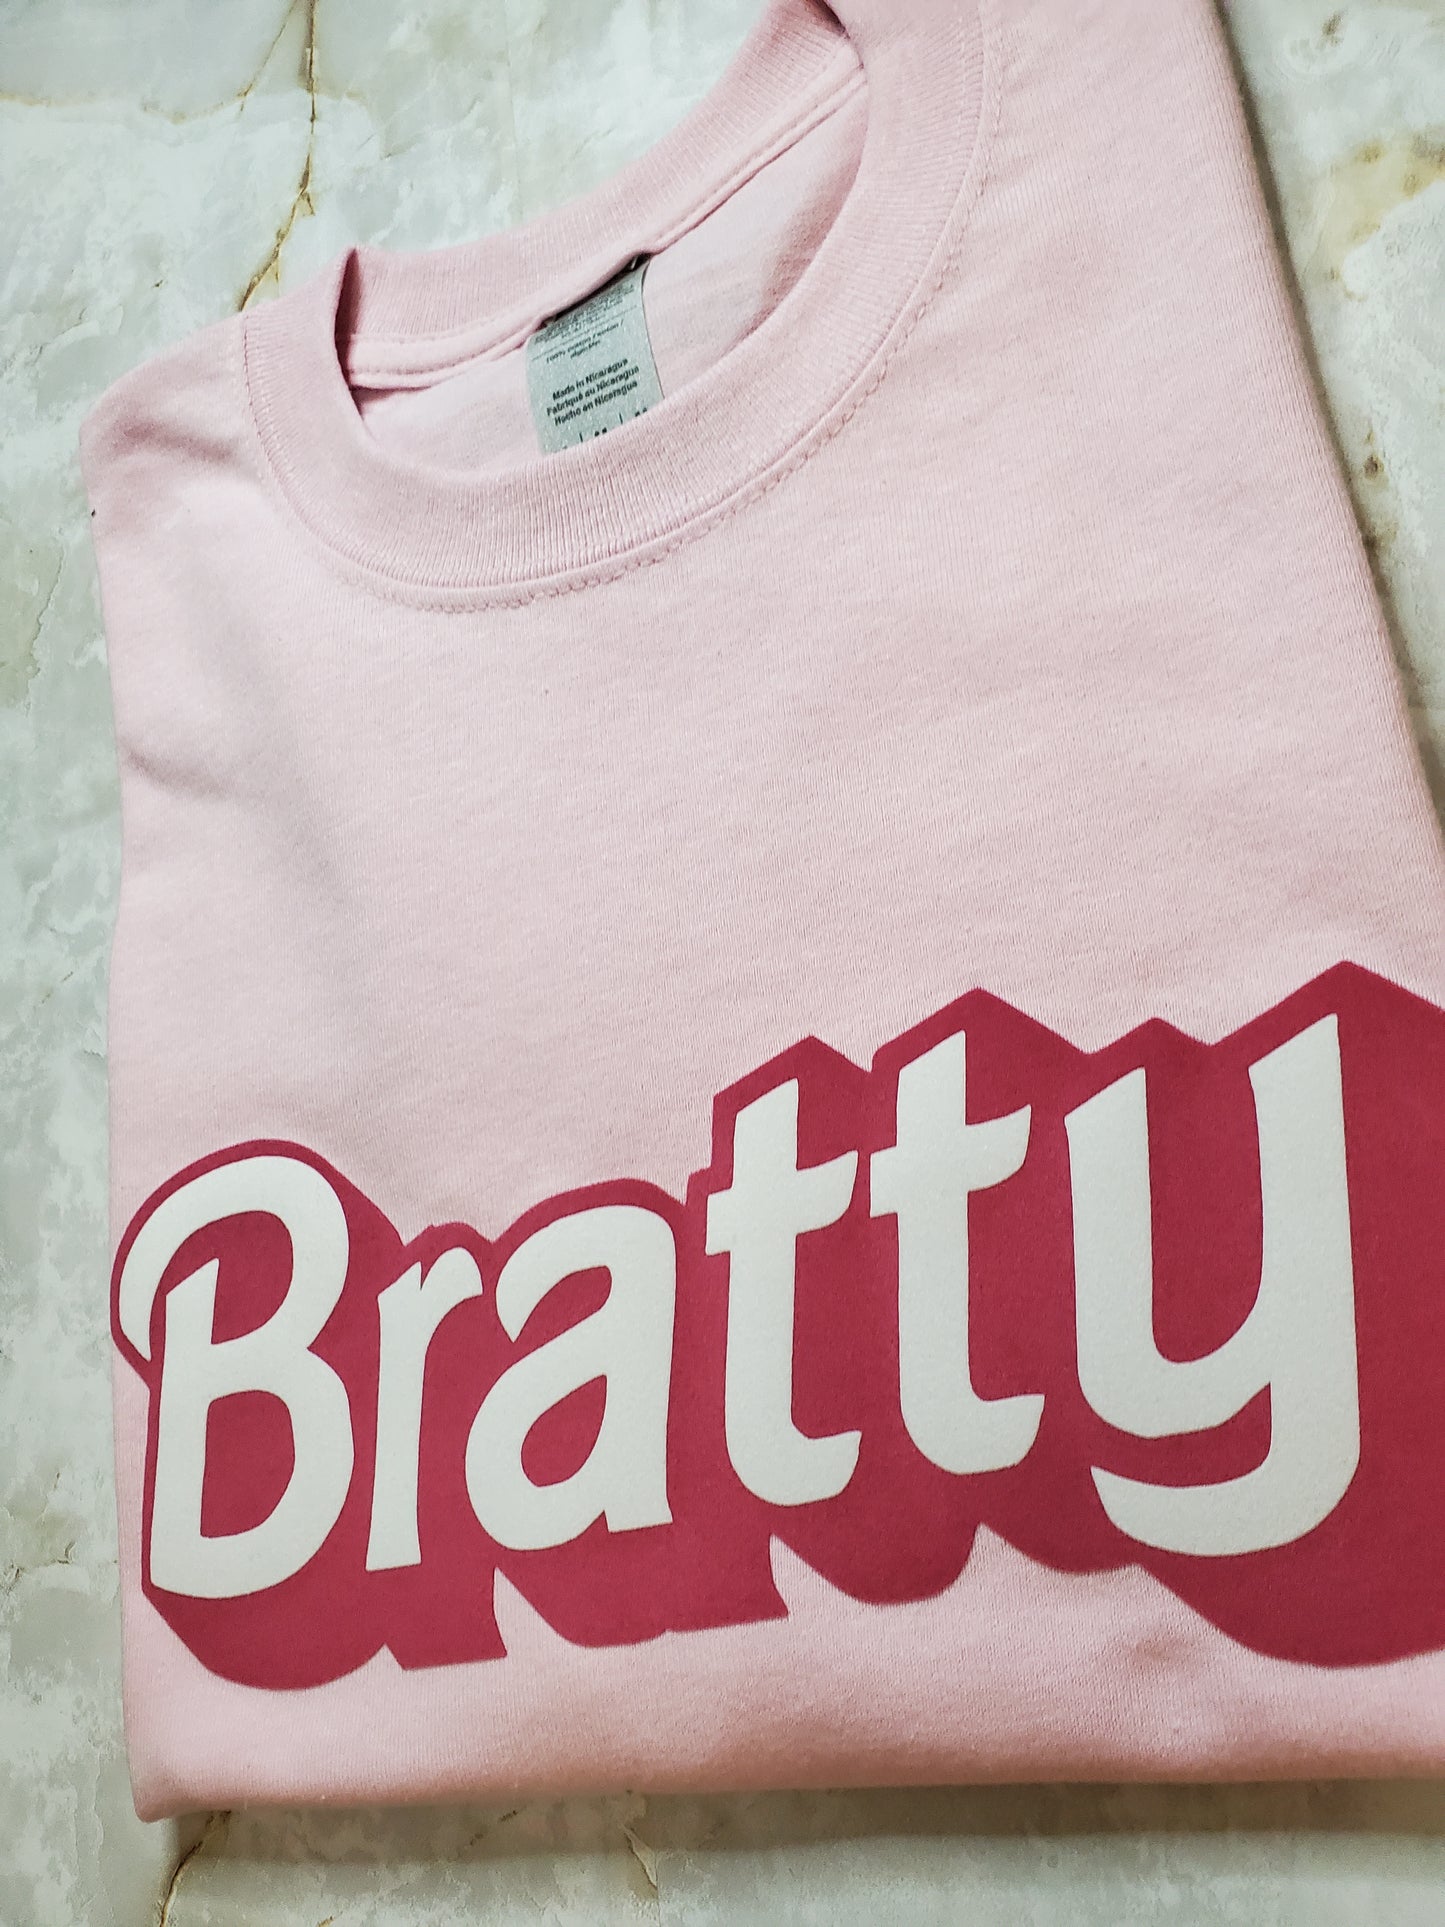 Bratty Cropped T-Shirt - Centre Ave Clothing Co.